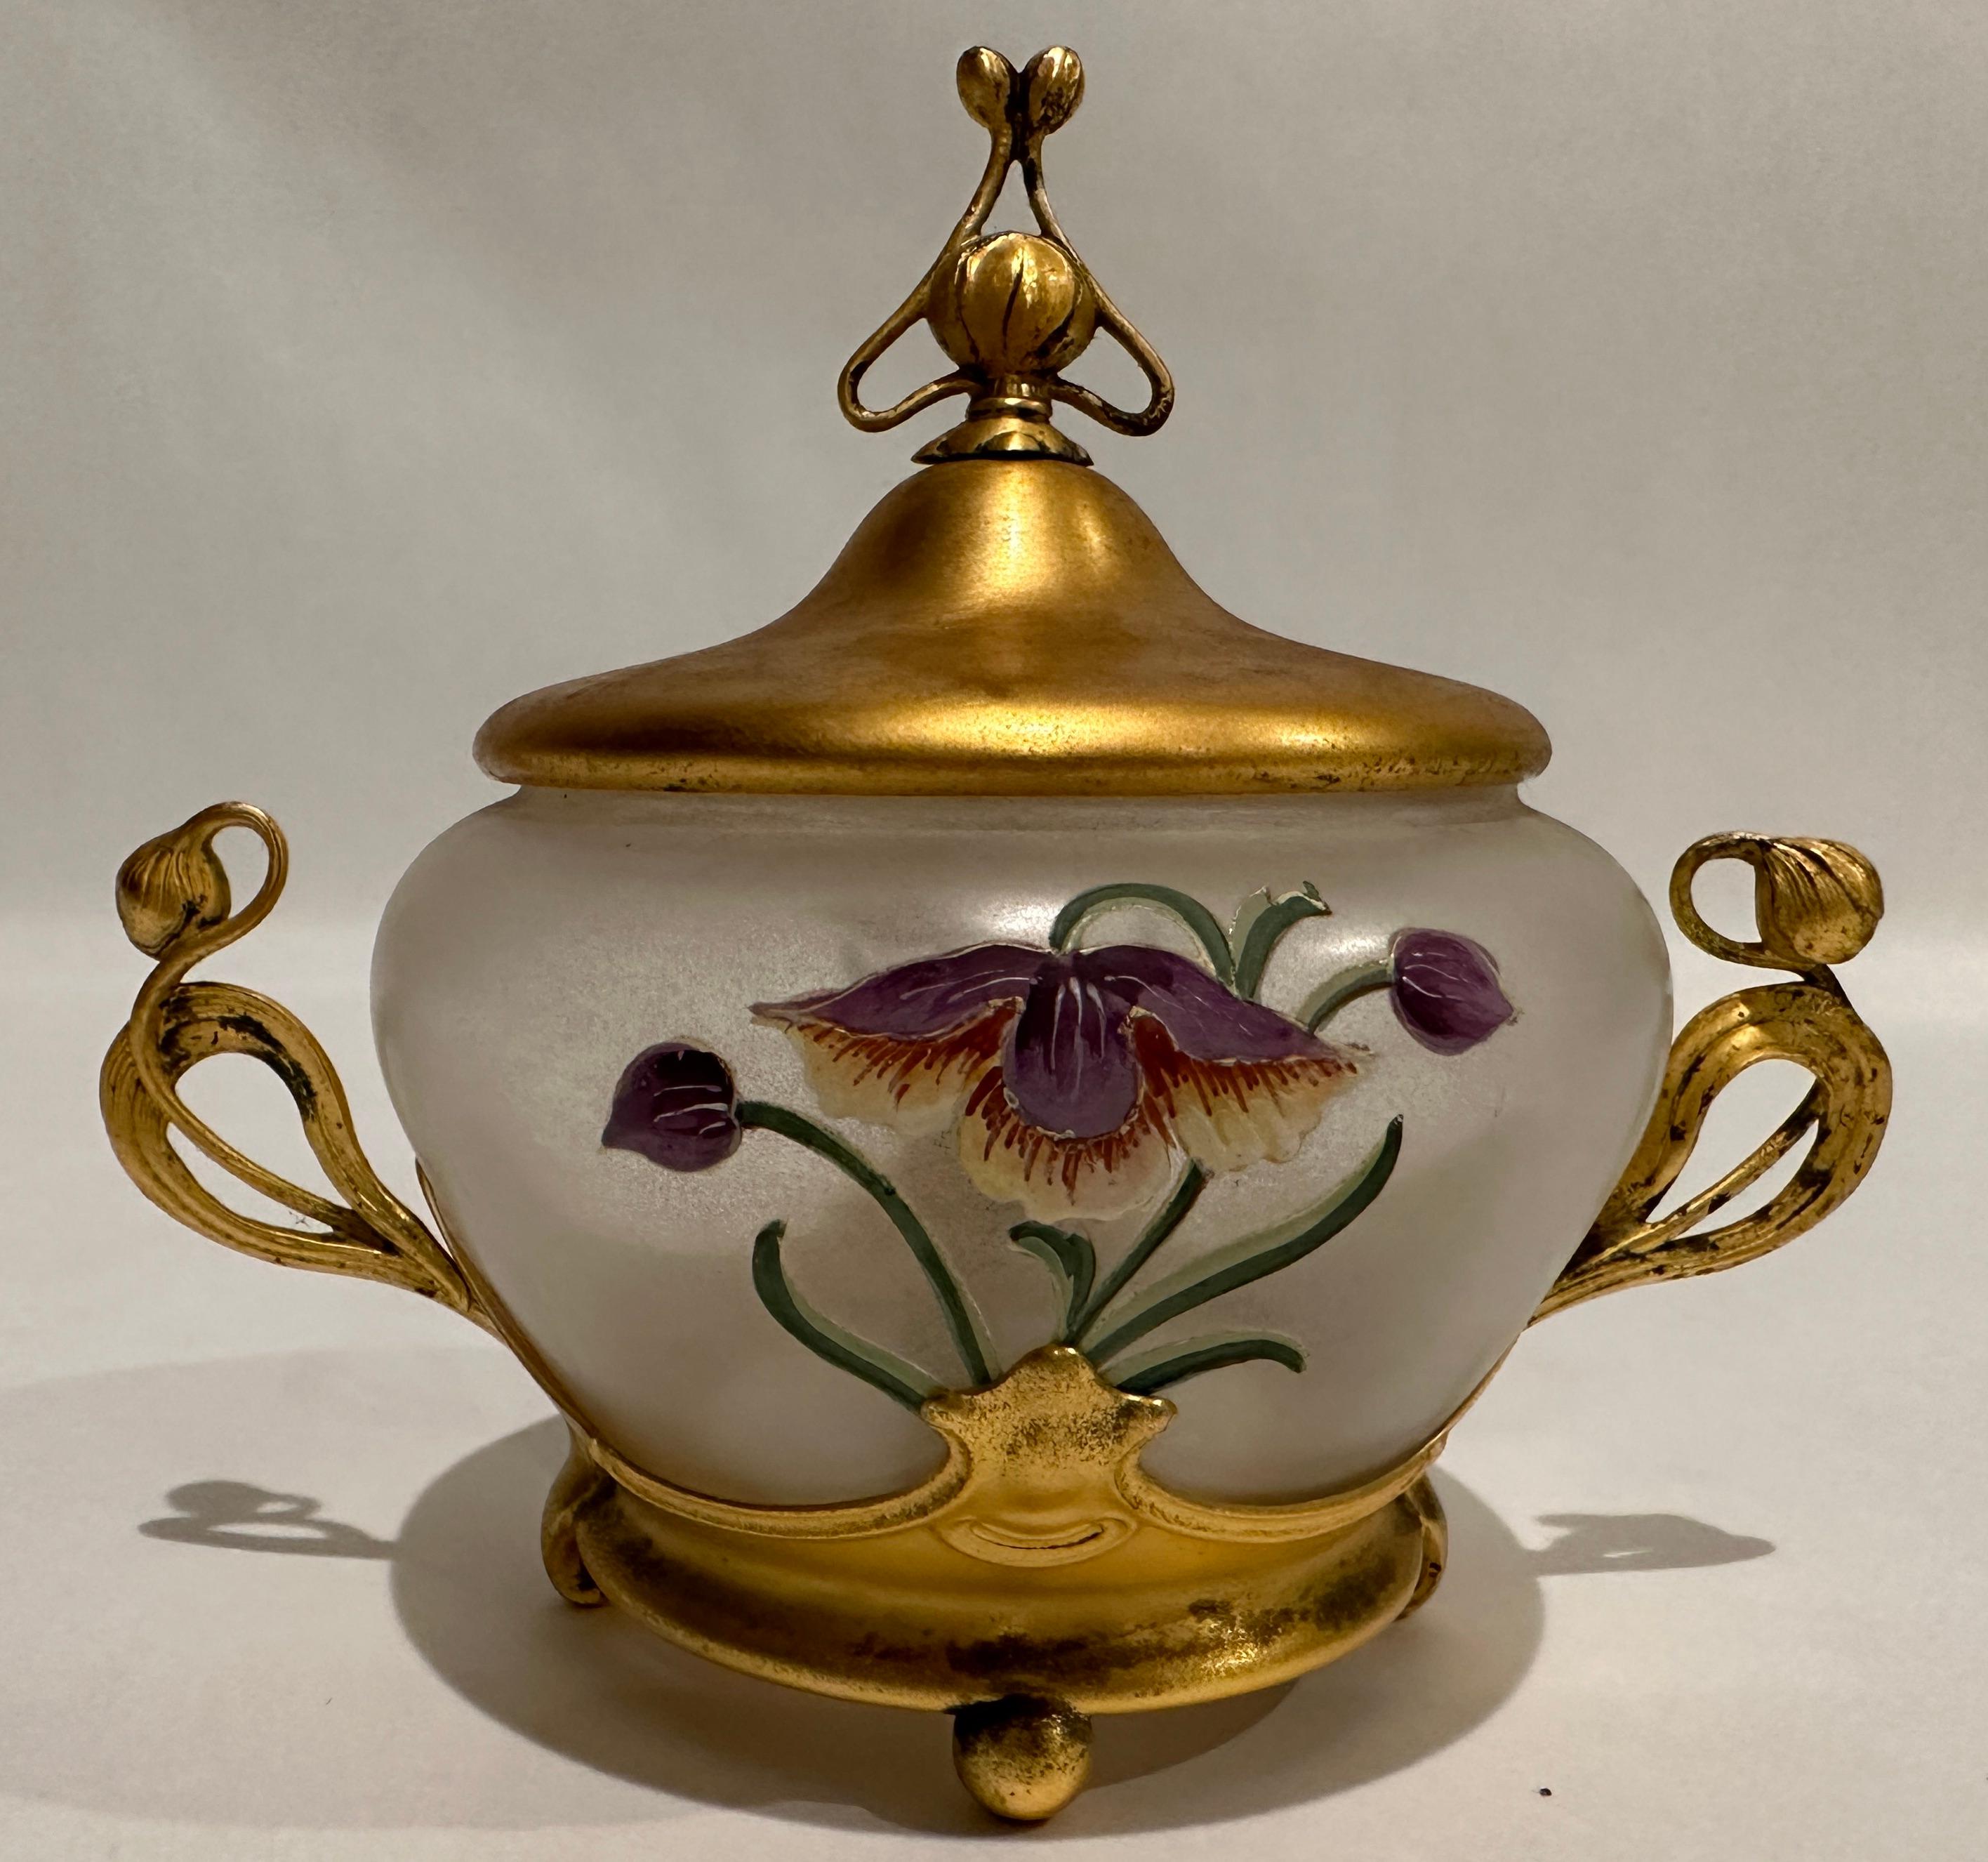 WMF Art Nouveau Germany painted glass and gilt dresser box, 1900s. An exceptional example of the WMF Art Nouveau workmanship, combining the gilt figural stylized handles, holding an exquisitely enamel painted frosted glass body, with stylized